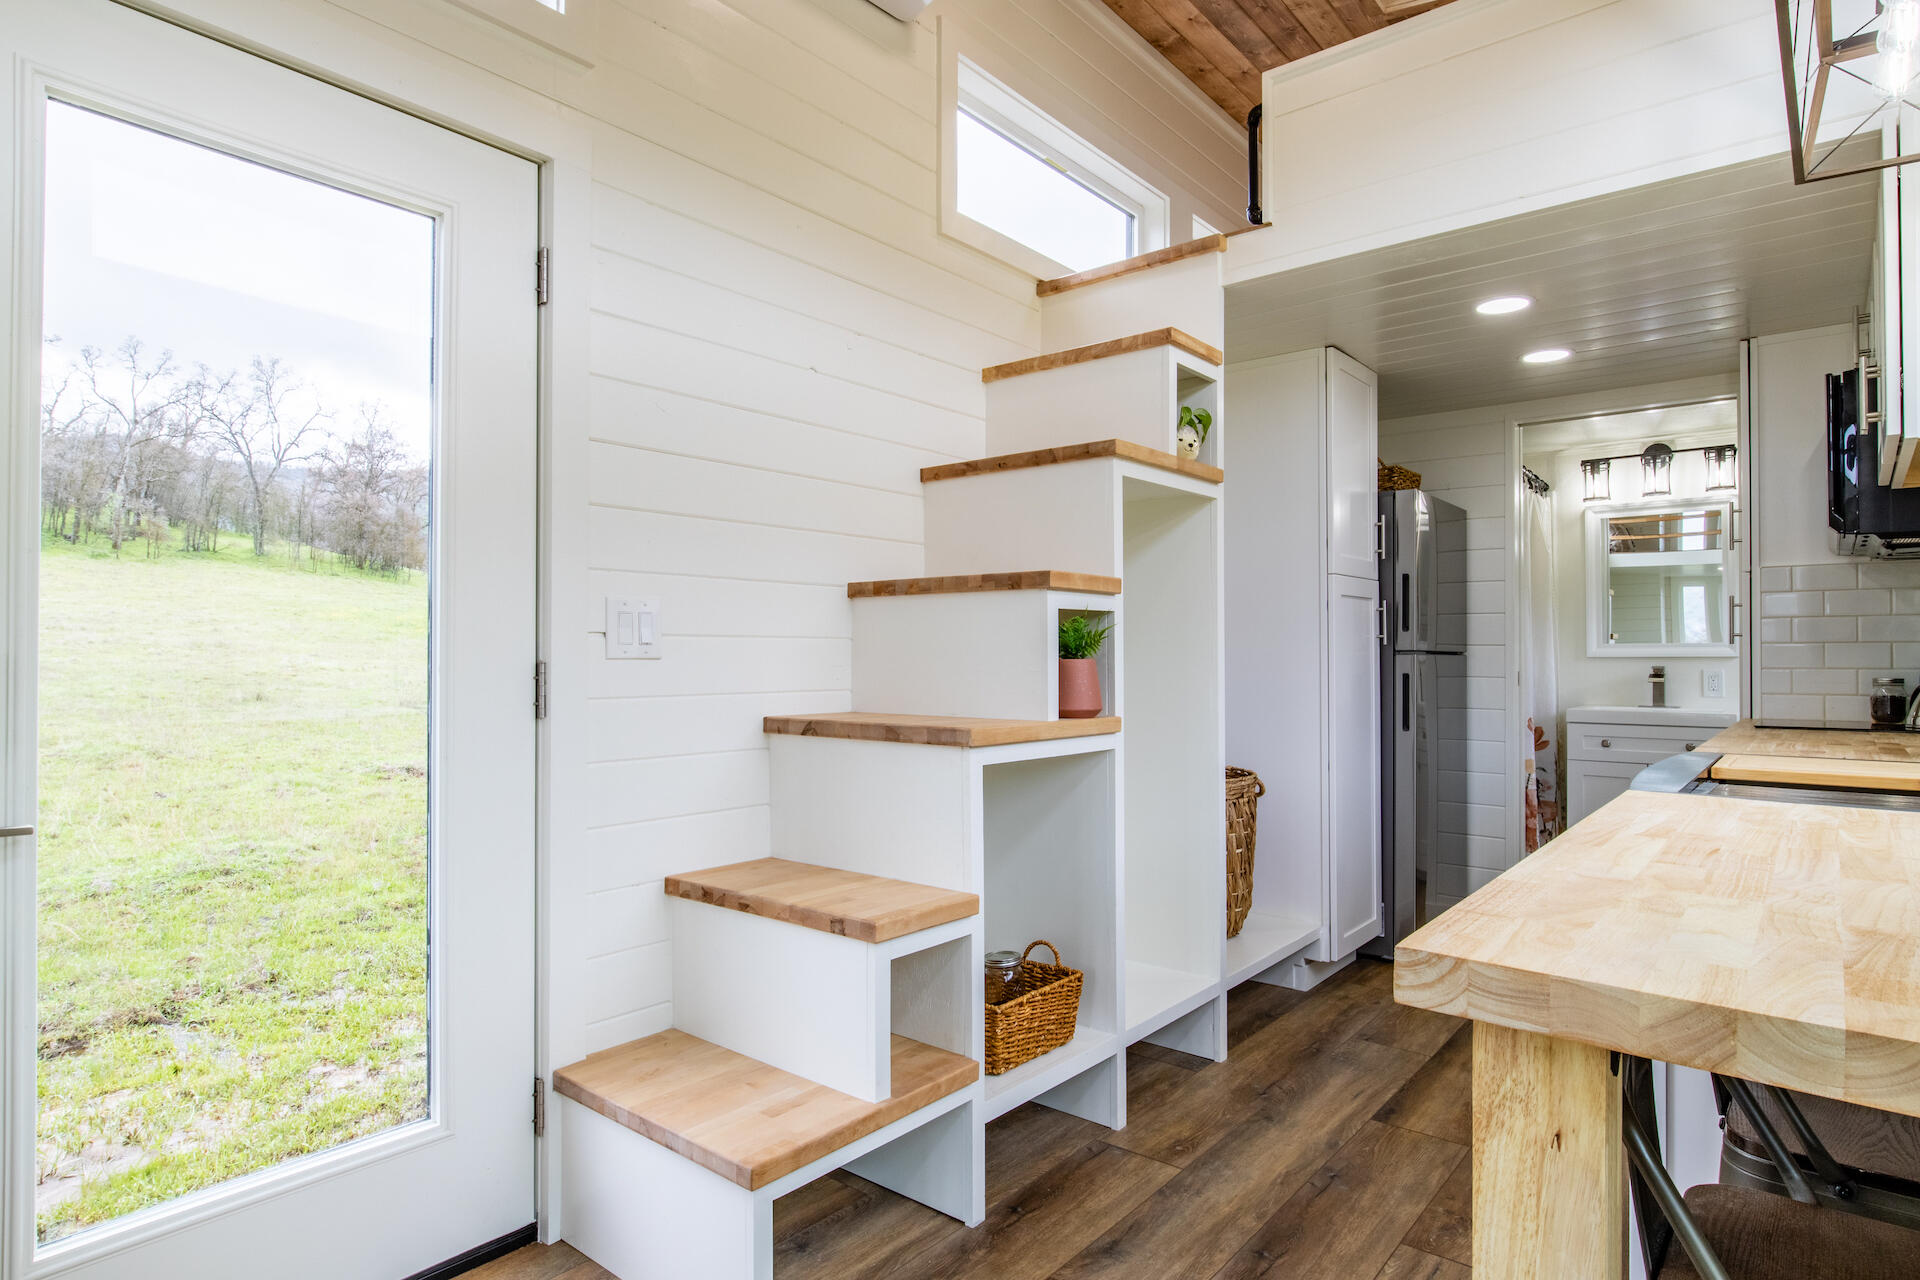 JT Collective's First Tiny House Design Lets You Simplify Your